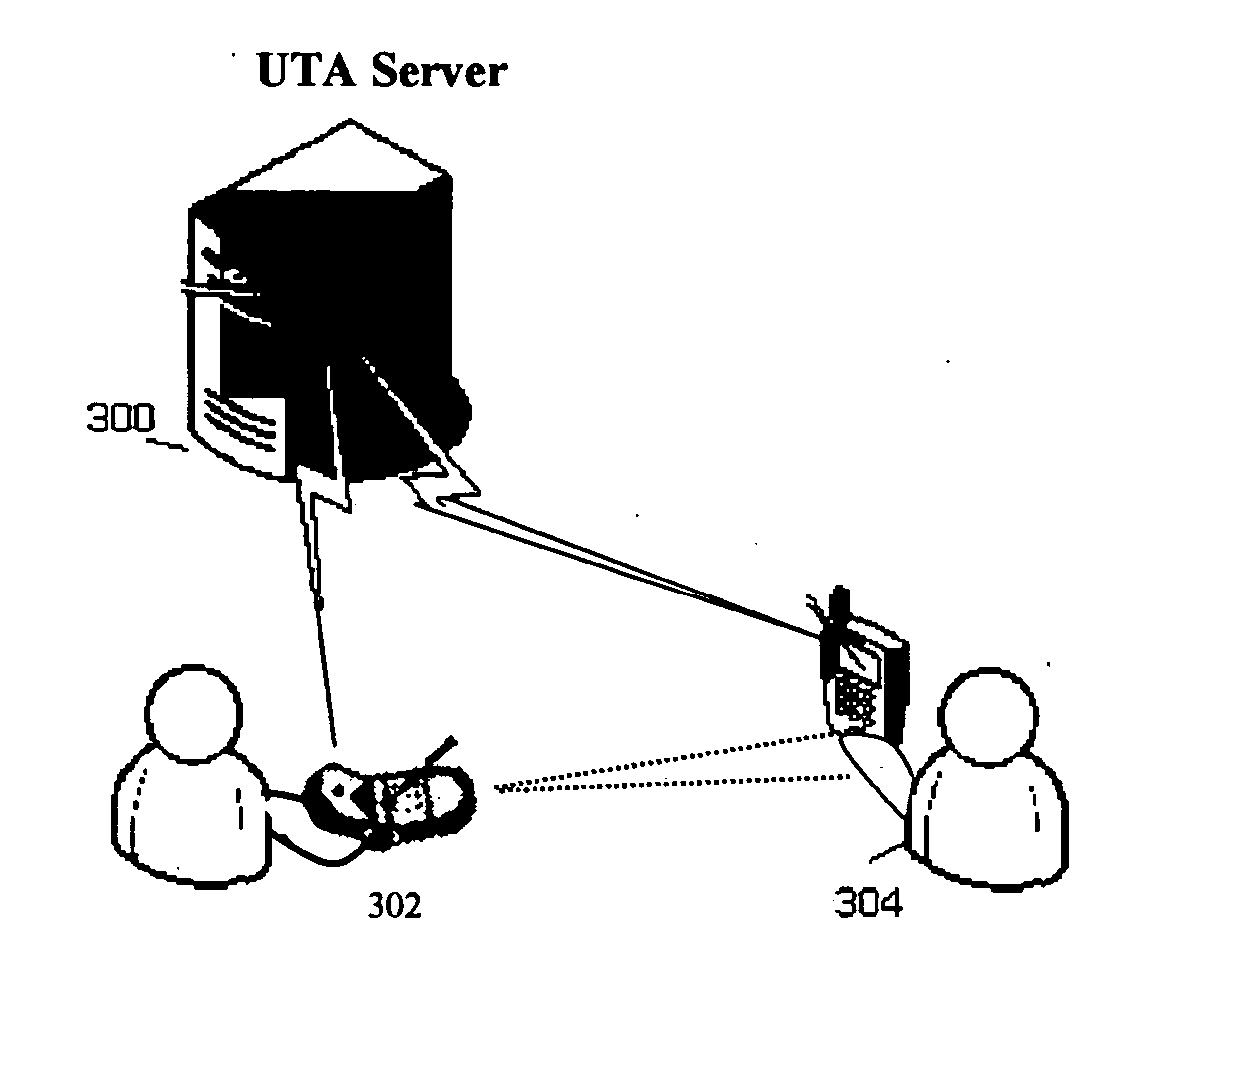 Pointing interface for person-to-person information exchange